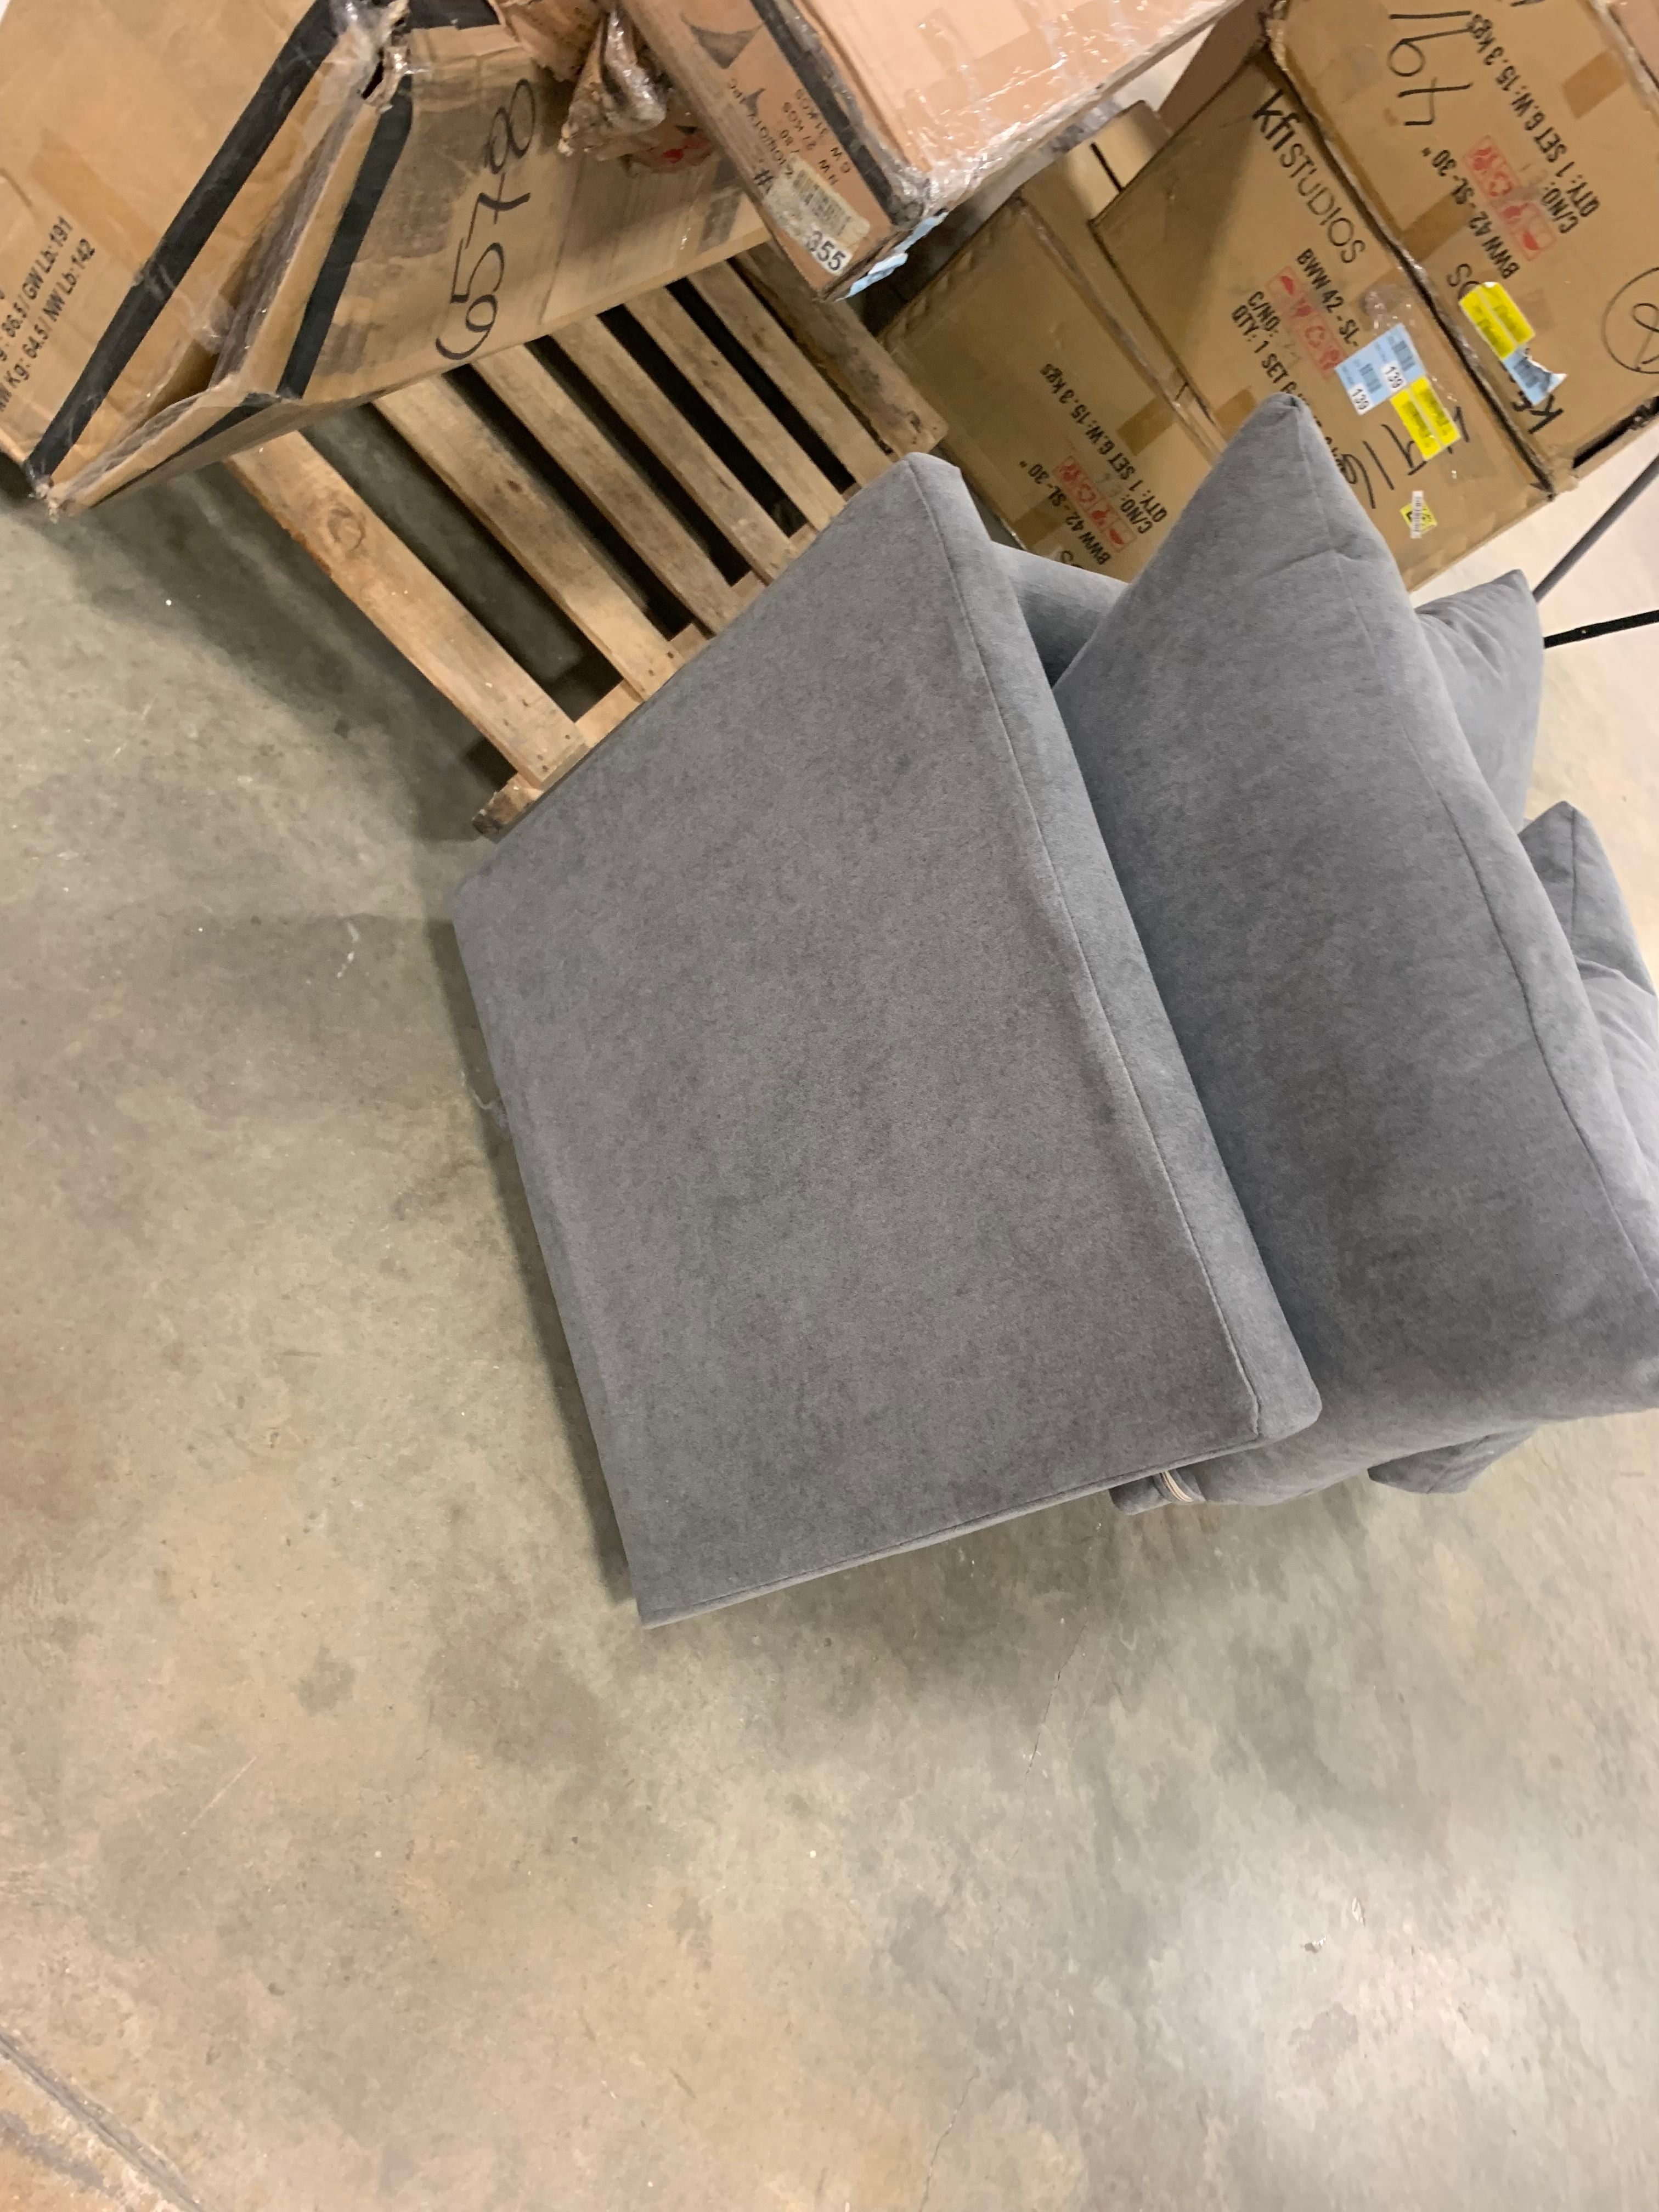 Half Sectional Chaise